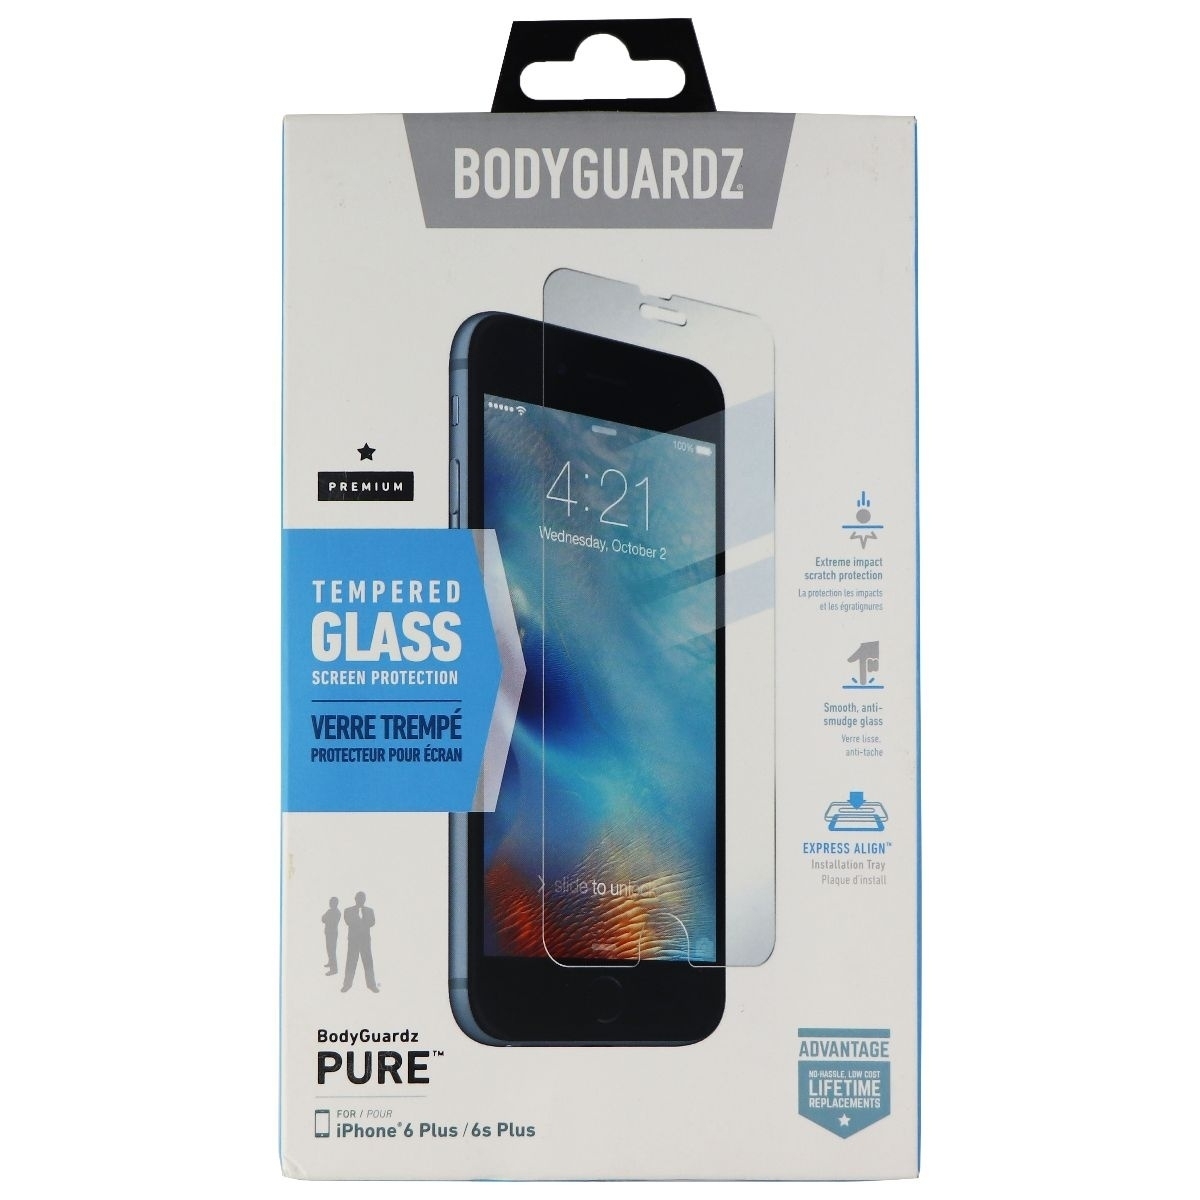 BodyGuardz Pure Tempered Glass Protector For IPhone 6s Plus & 6 Plus - Clear